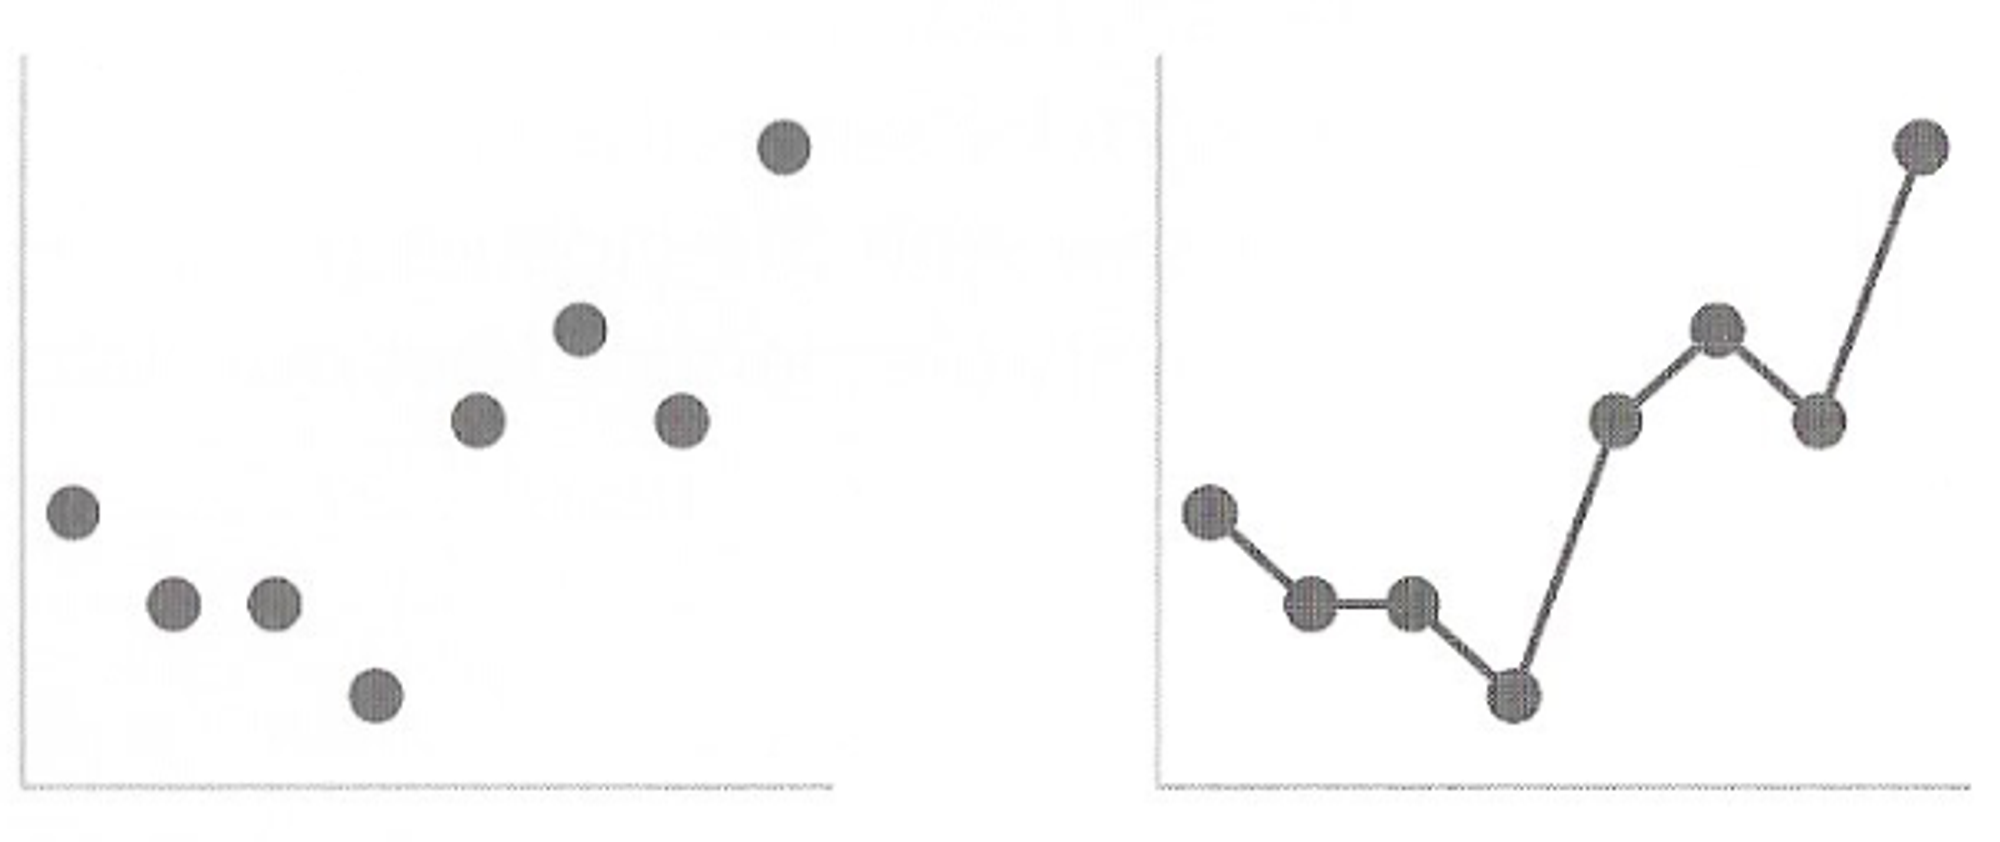 So, we leverage connection principle in a line graphs, to help our eyes to see orders in the data.